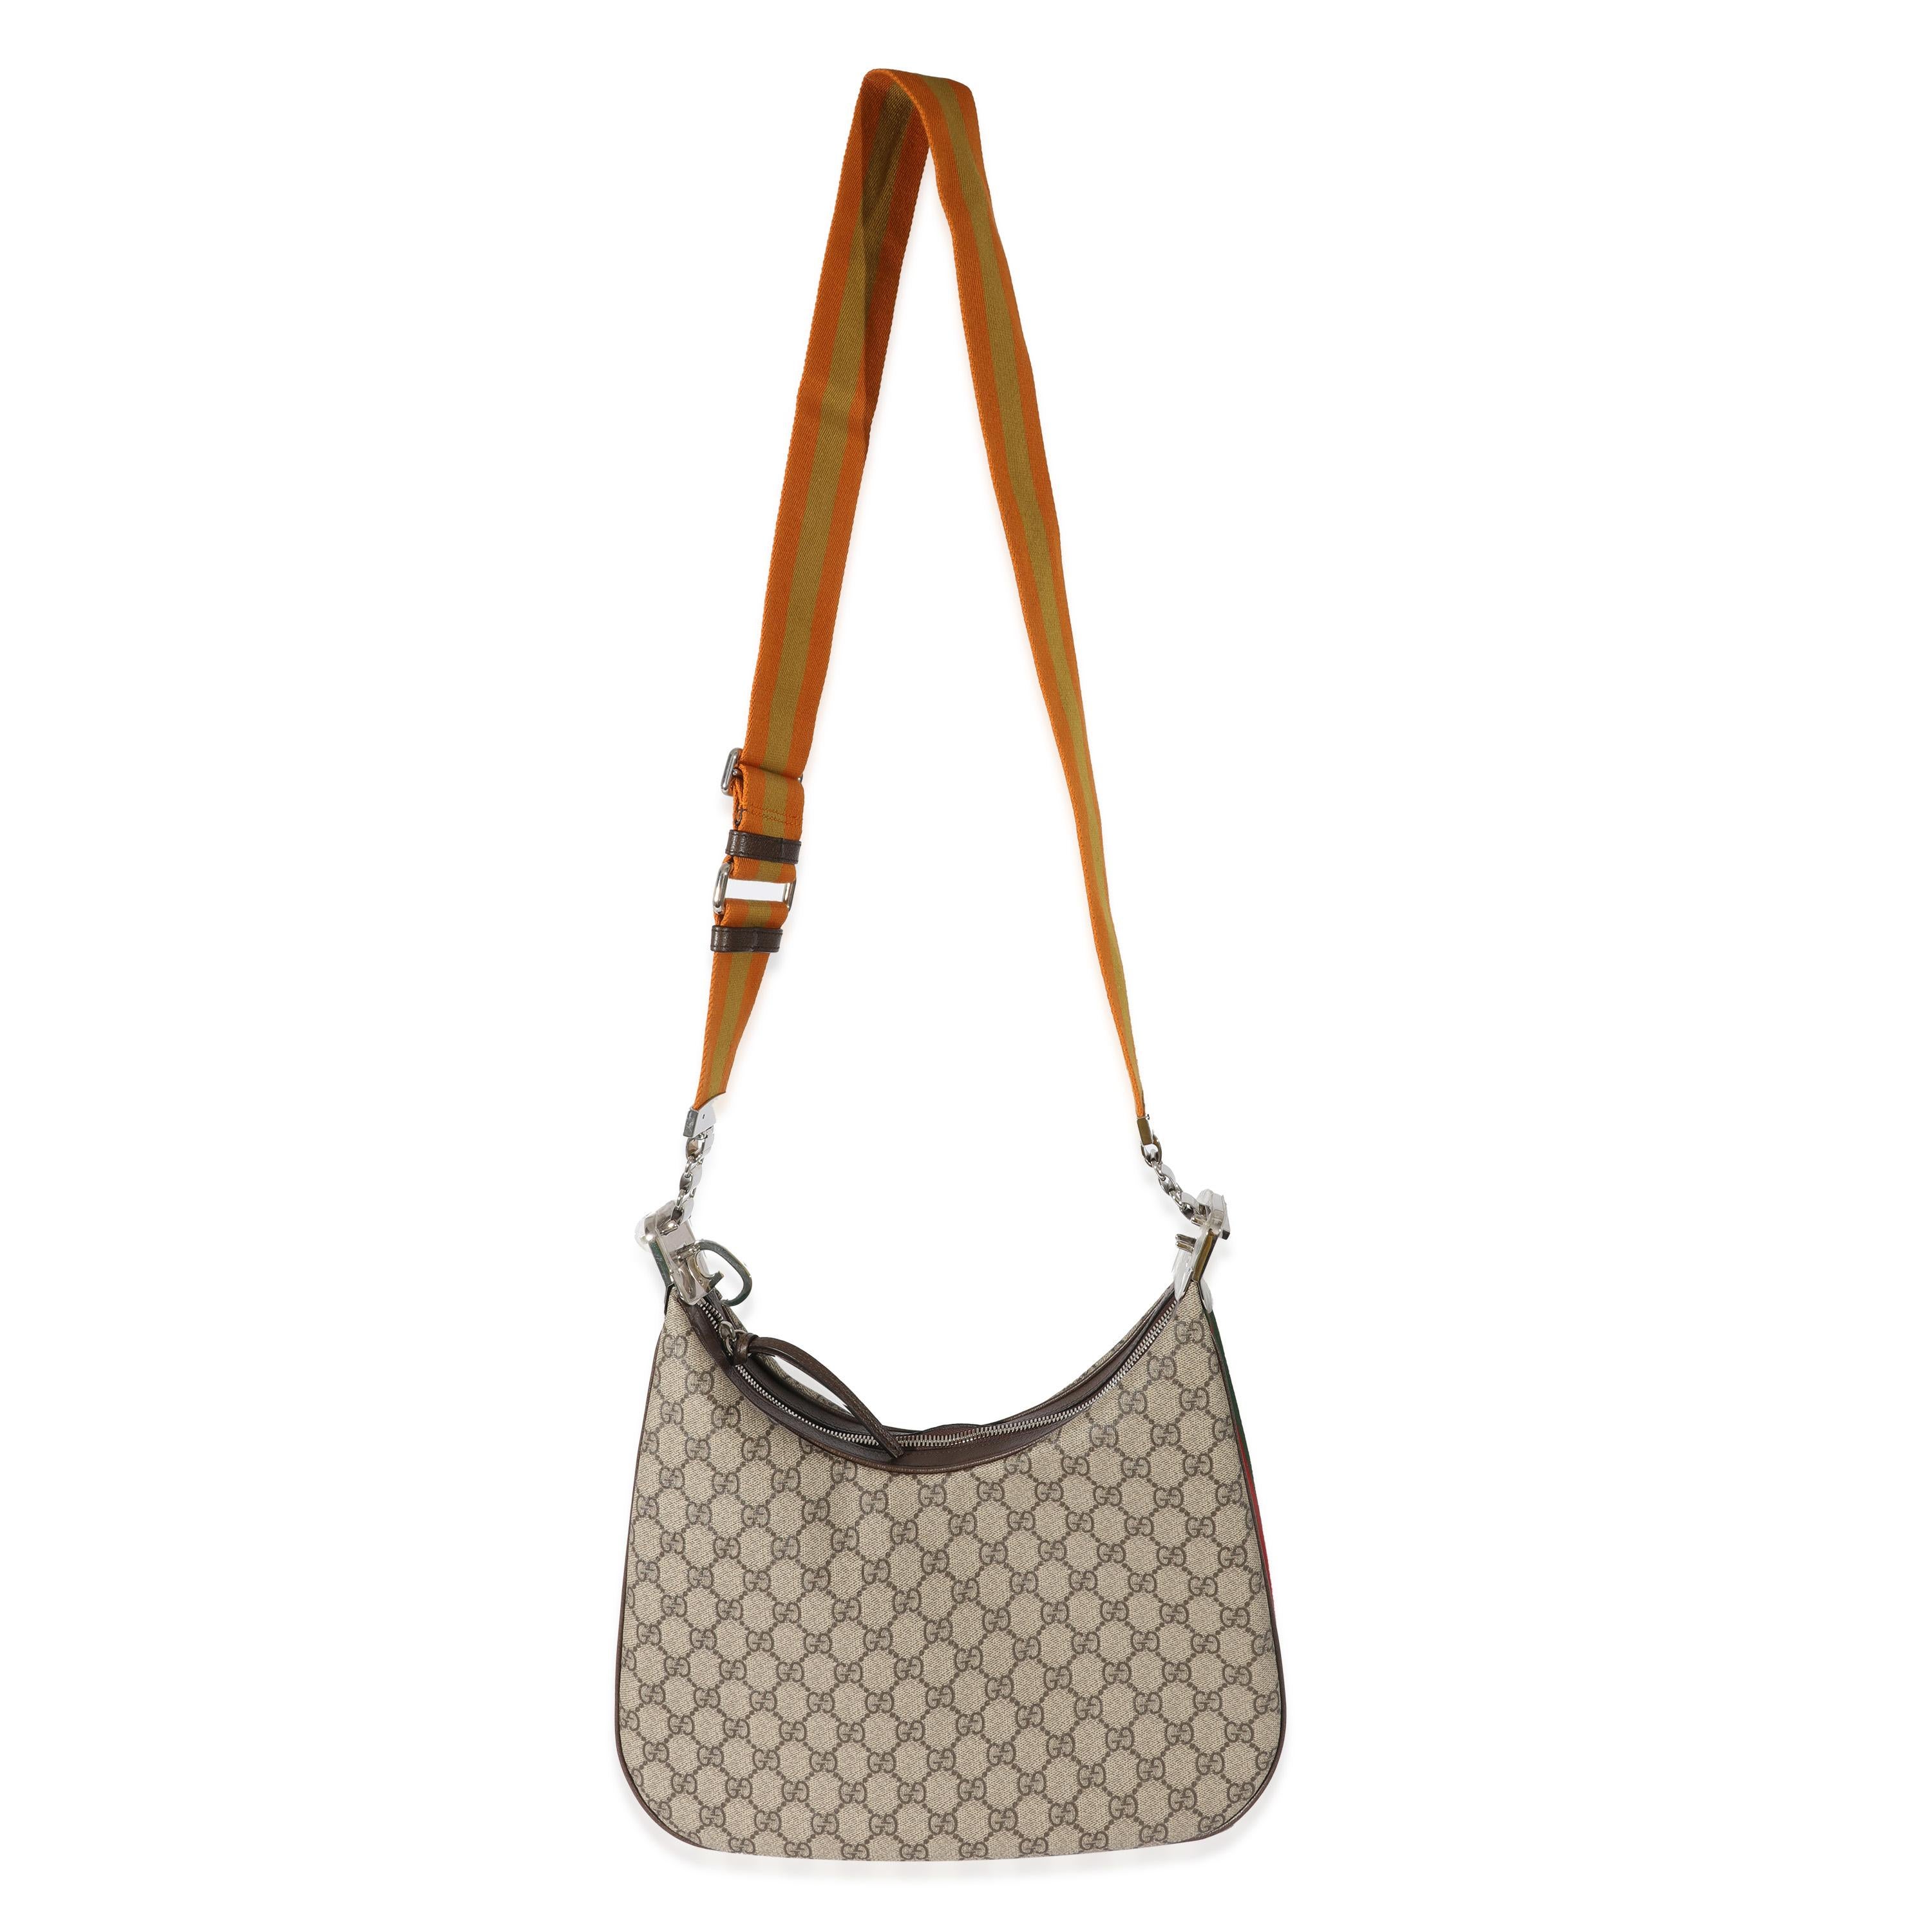 Listing Title: Gucci Beige GG Canvas Large Attache Shoulder Bag
 SKU: 128468
 MSRP: 2980.00
 Condition: Pre-owned 
 Handbag Condition: Excellent
 Condition Comments: Excellent Condition. Plastic on some hardware. No visible signs of wear.
 Brand: